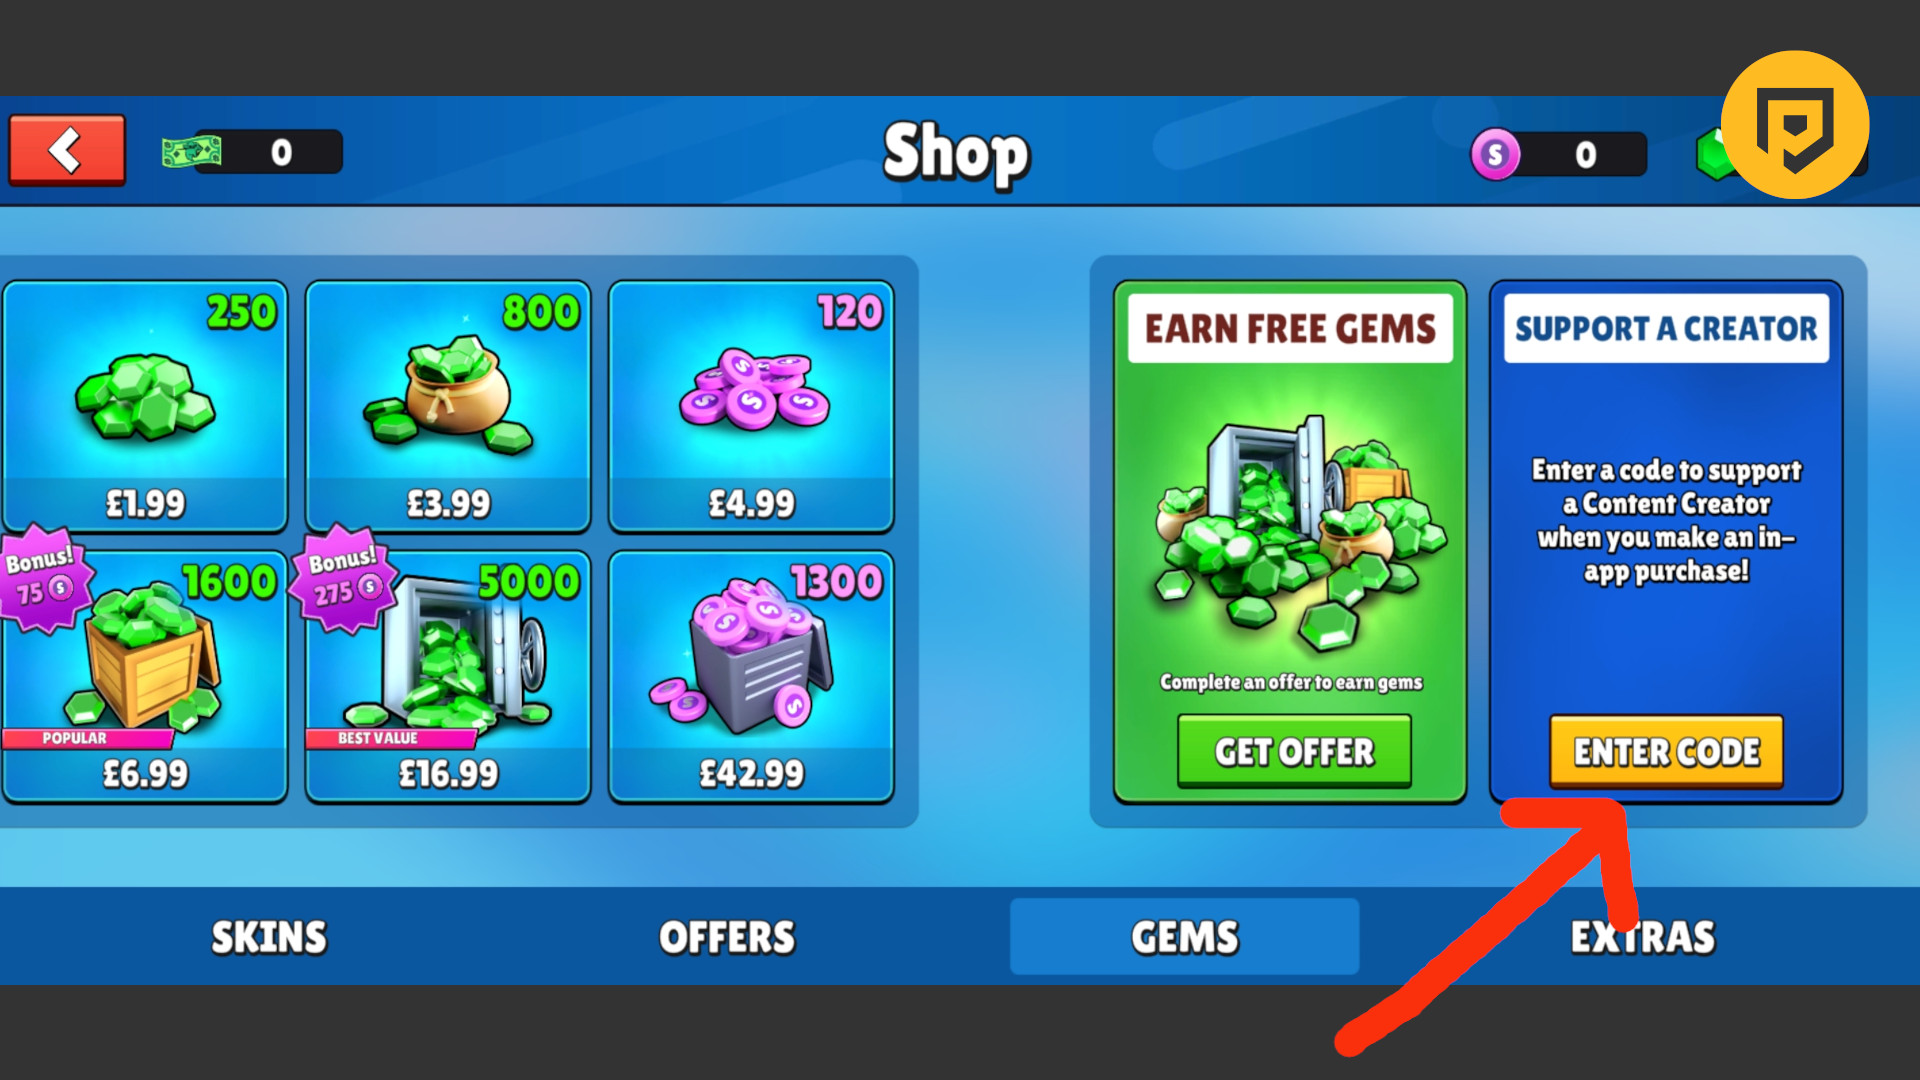 How to Get *Unlimited GEMS* in Stumble Guys iOS/Android (Free Gems Glitch)  